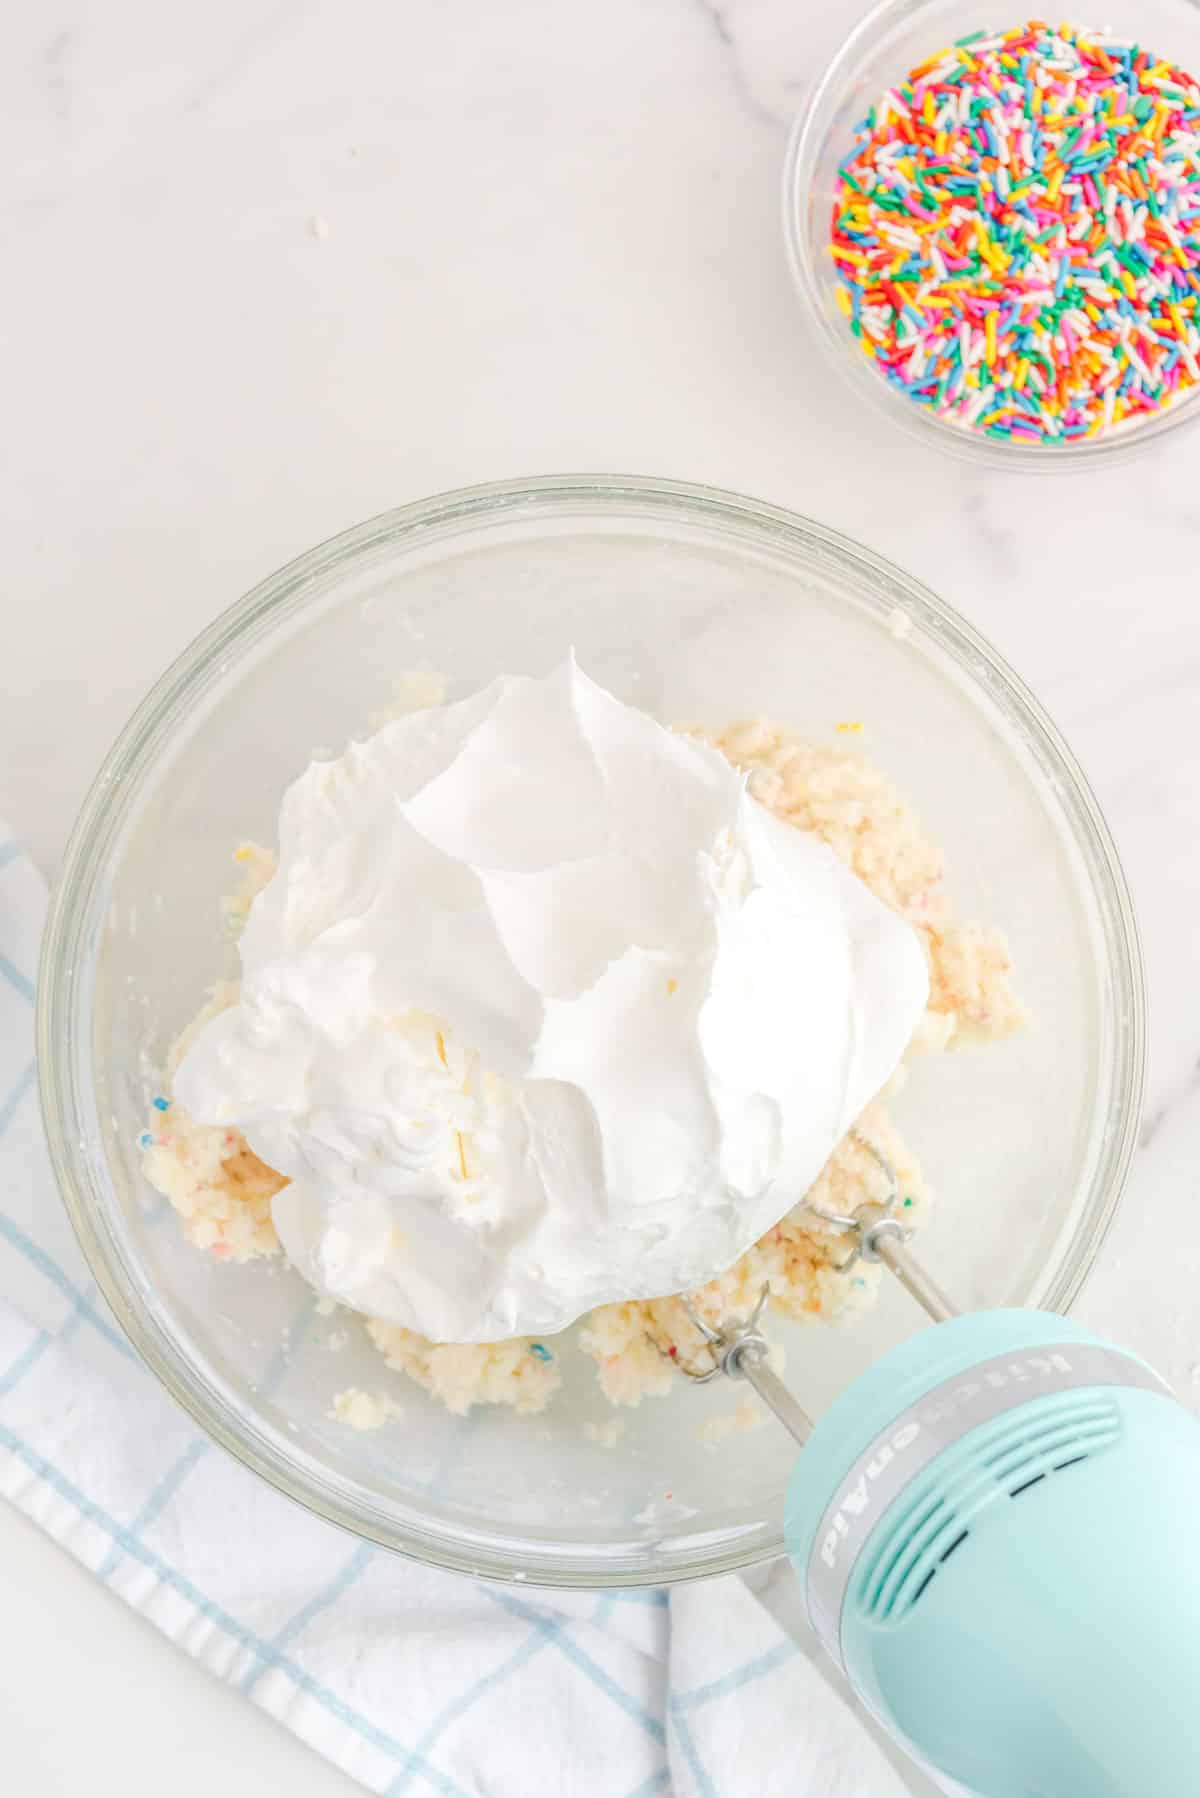 A bowl full of whipped cream and sprinkles.